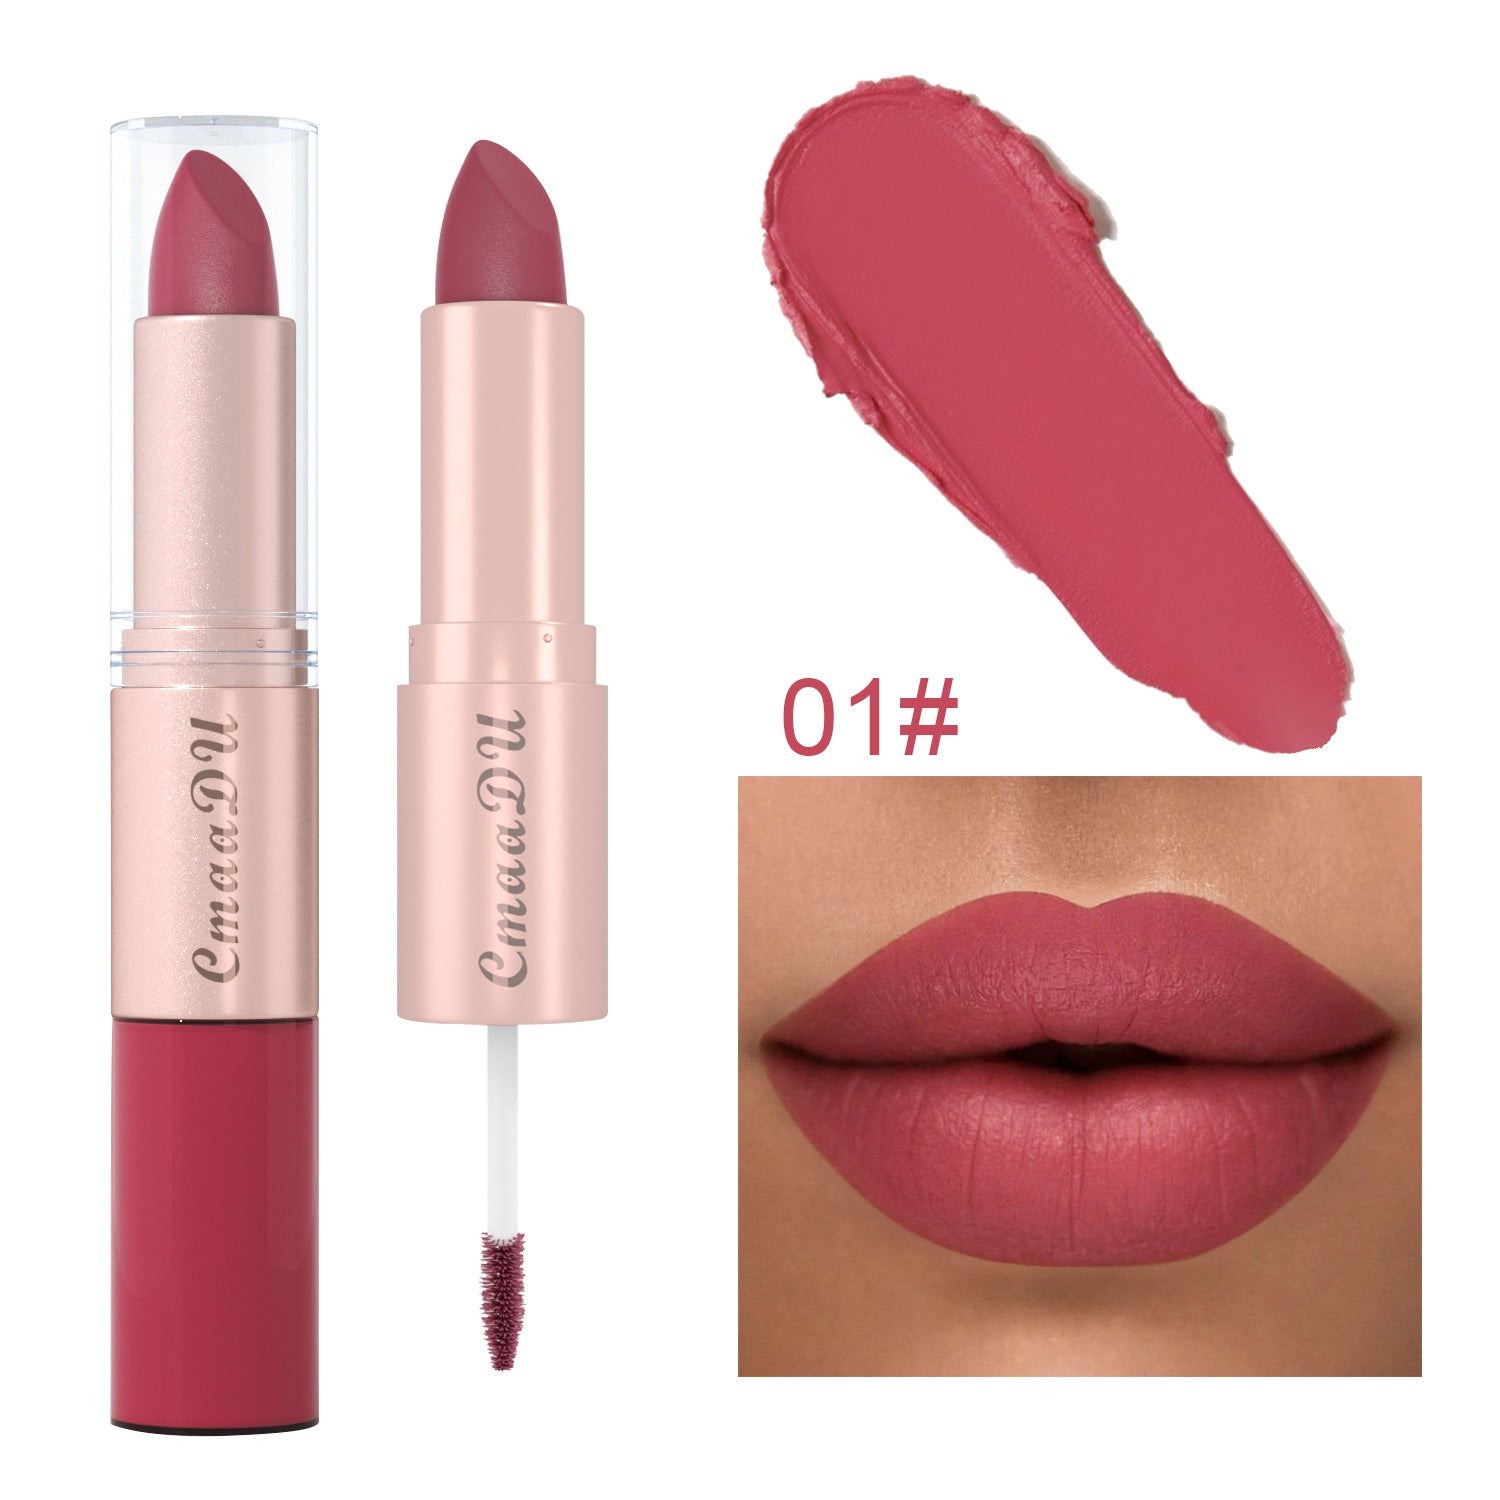 Double Ended Waterproof Matte Lipstick Nude Red Lip Tint